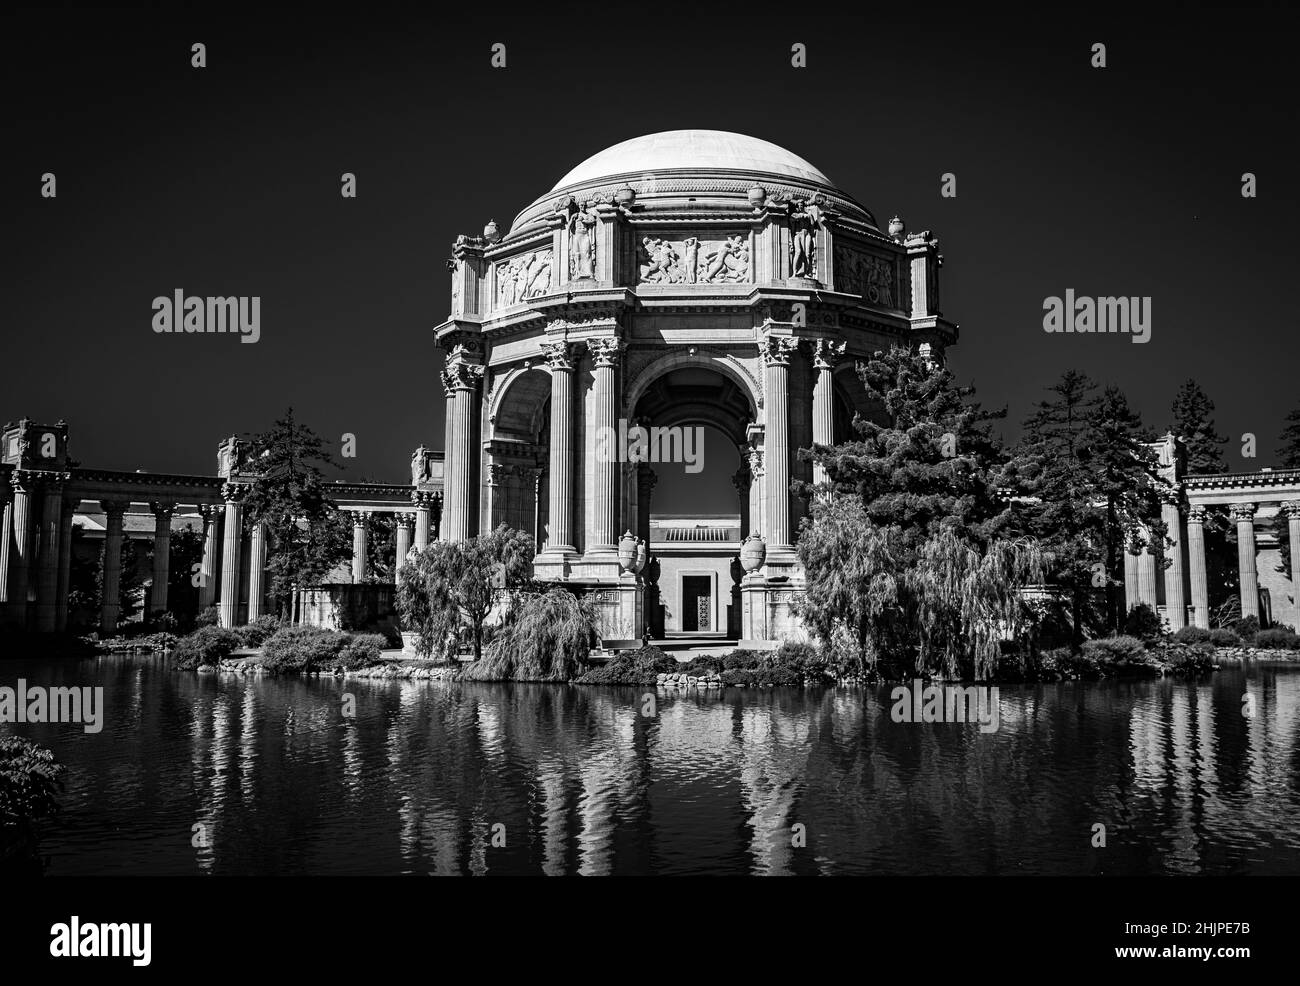 Grayscale of the San Francisco Palace of Fine Arts Stock Photo